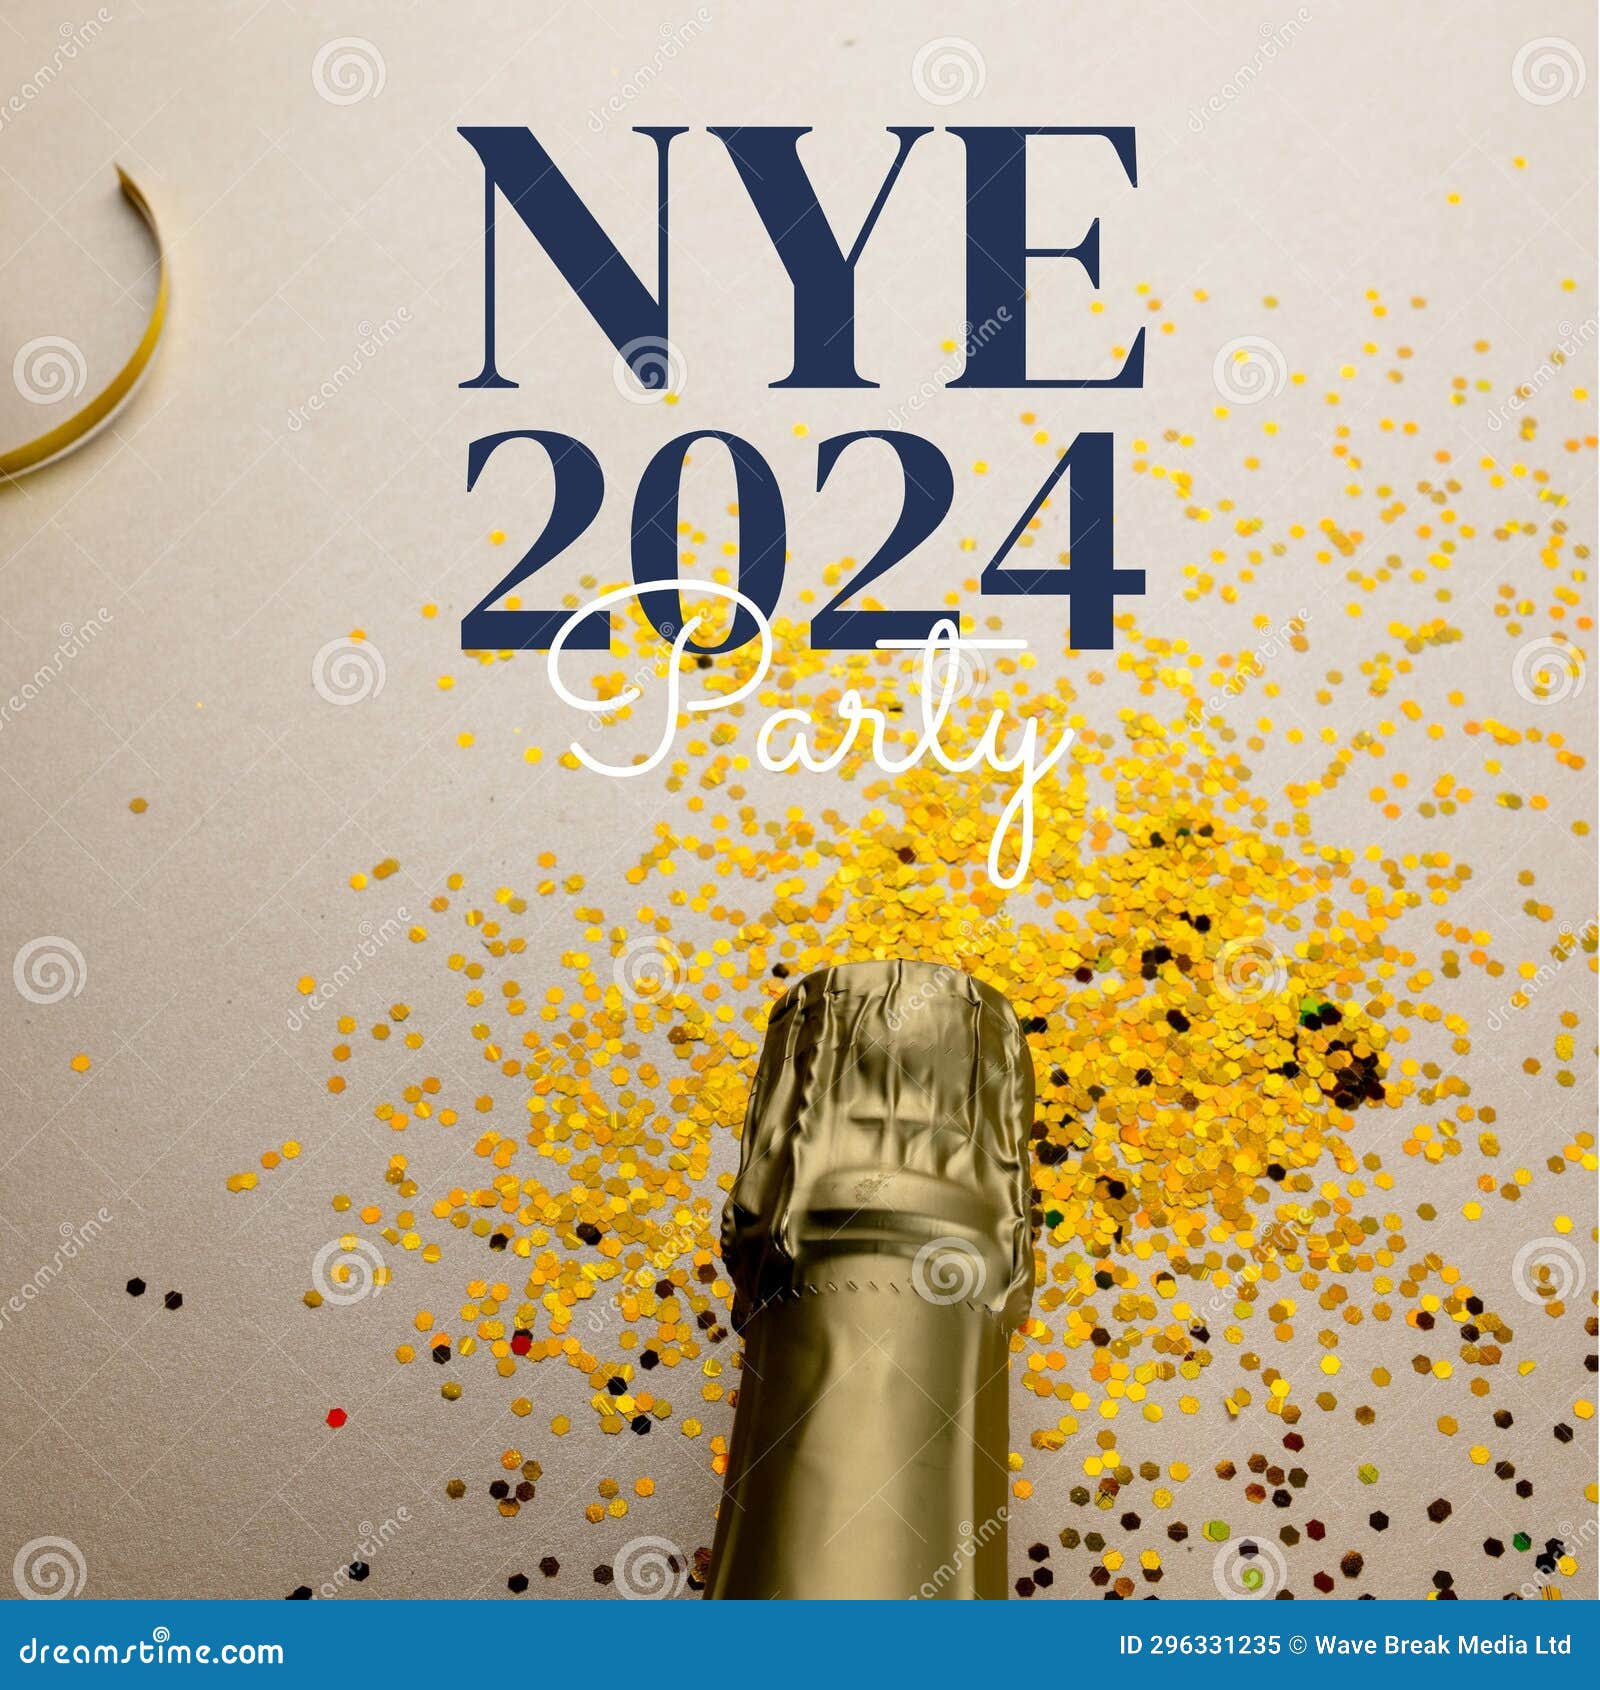 composite of nye 2024 party text over champagne bottle and confetti on white background